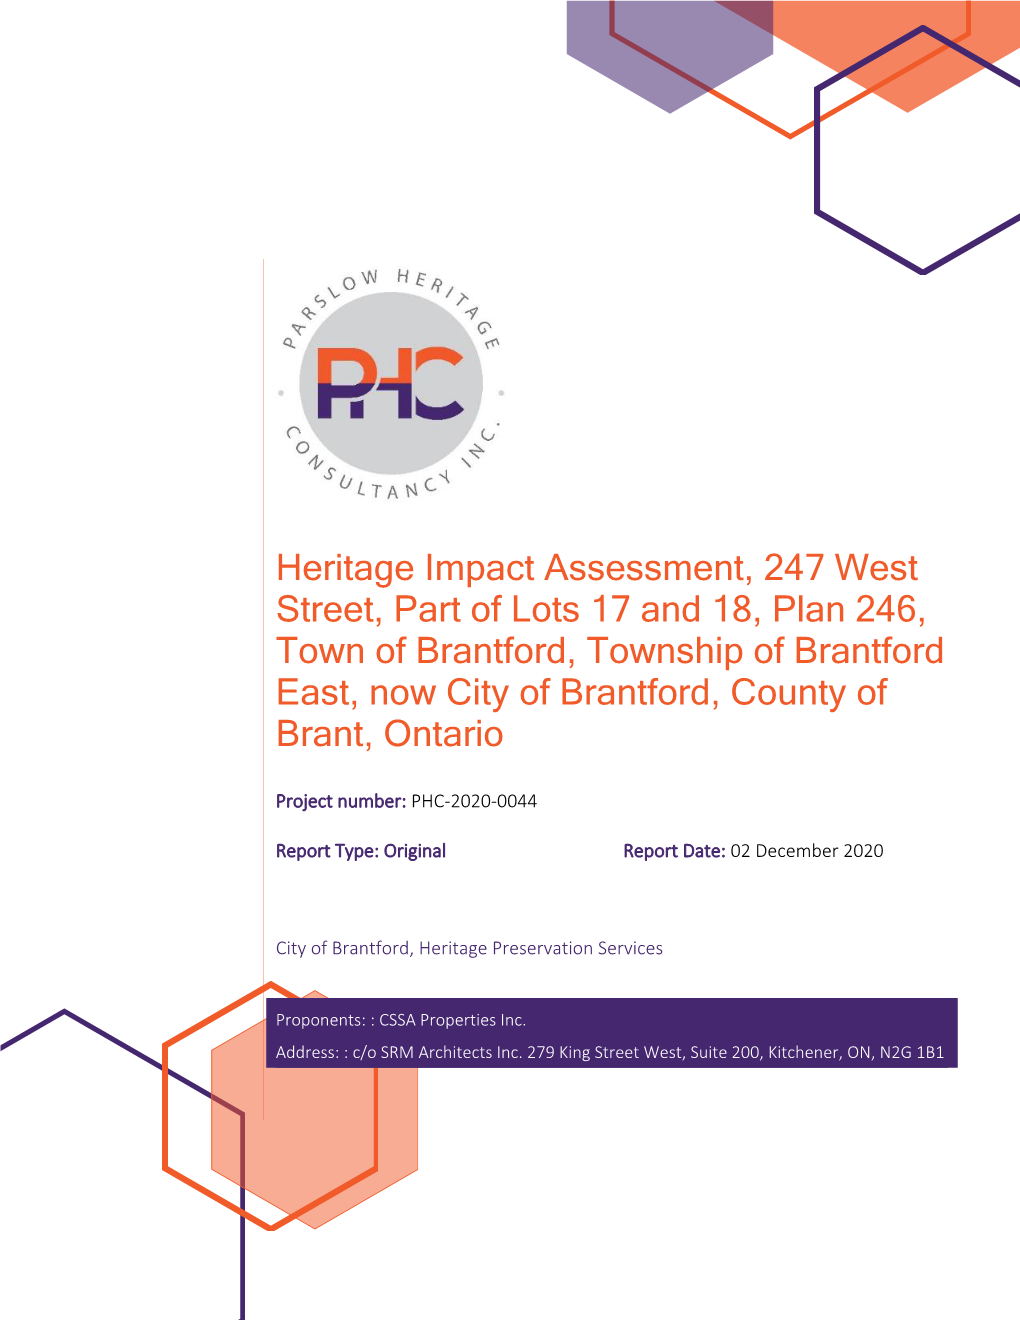 Heritage Impact Assessment, 247 West Street, Part of Lots 17 And